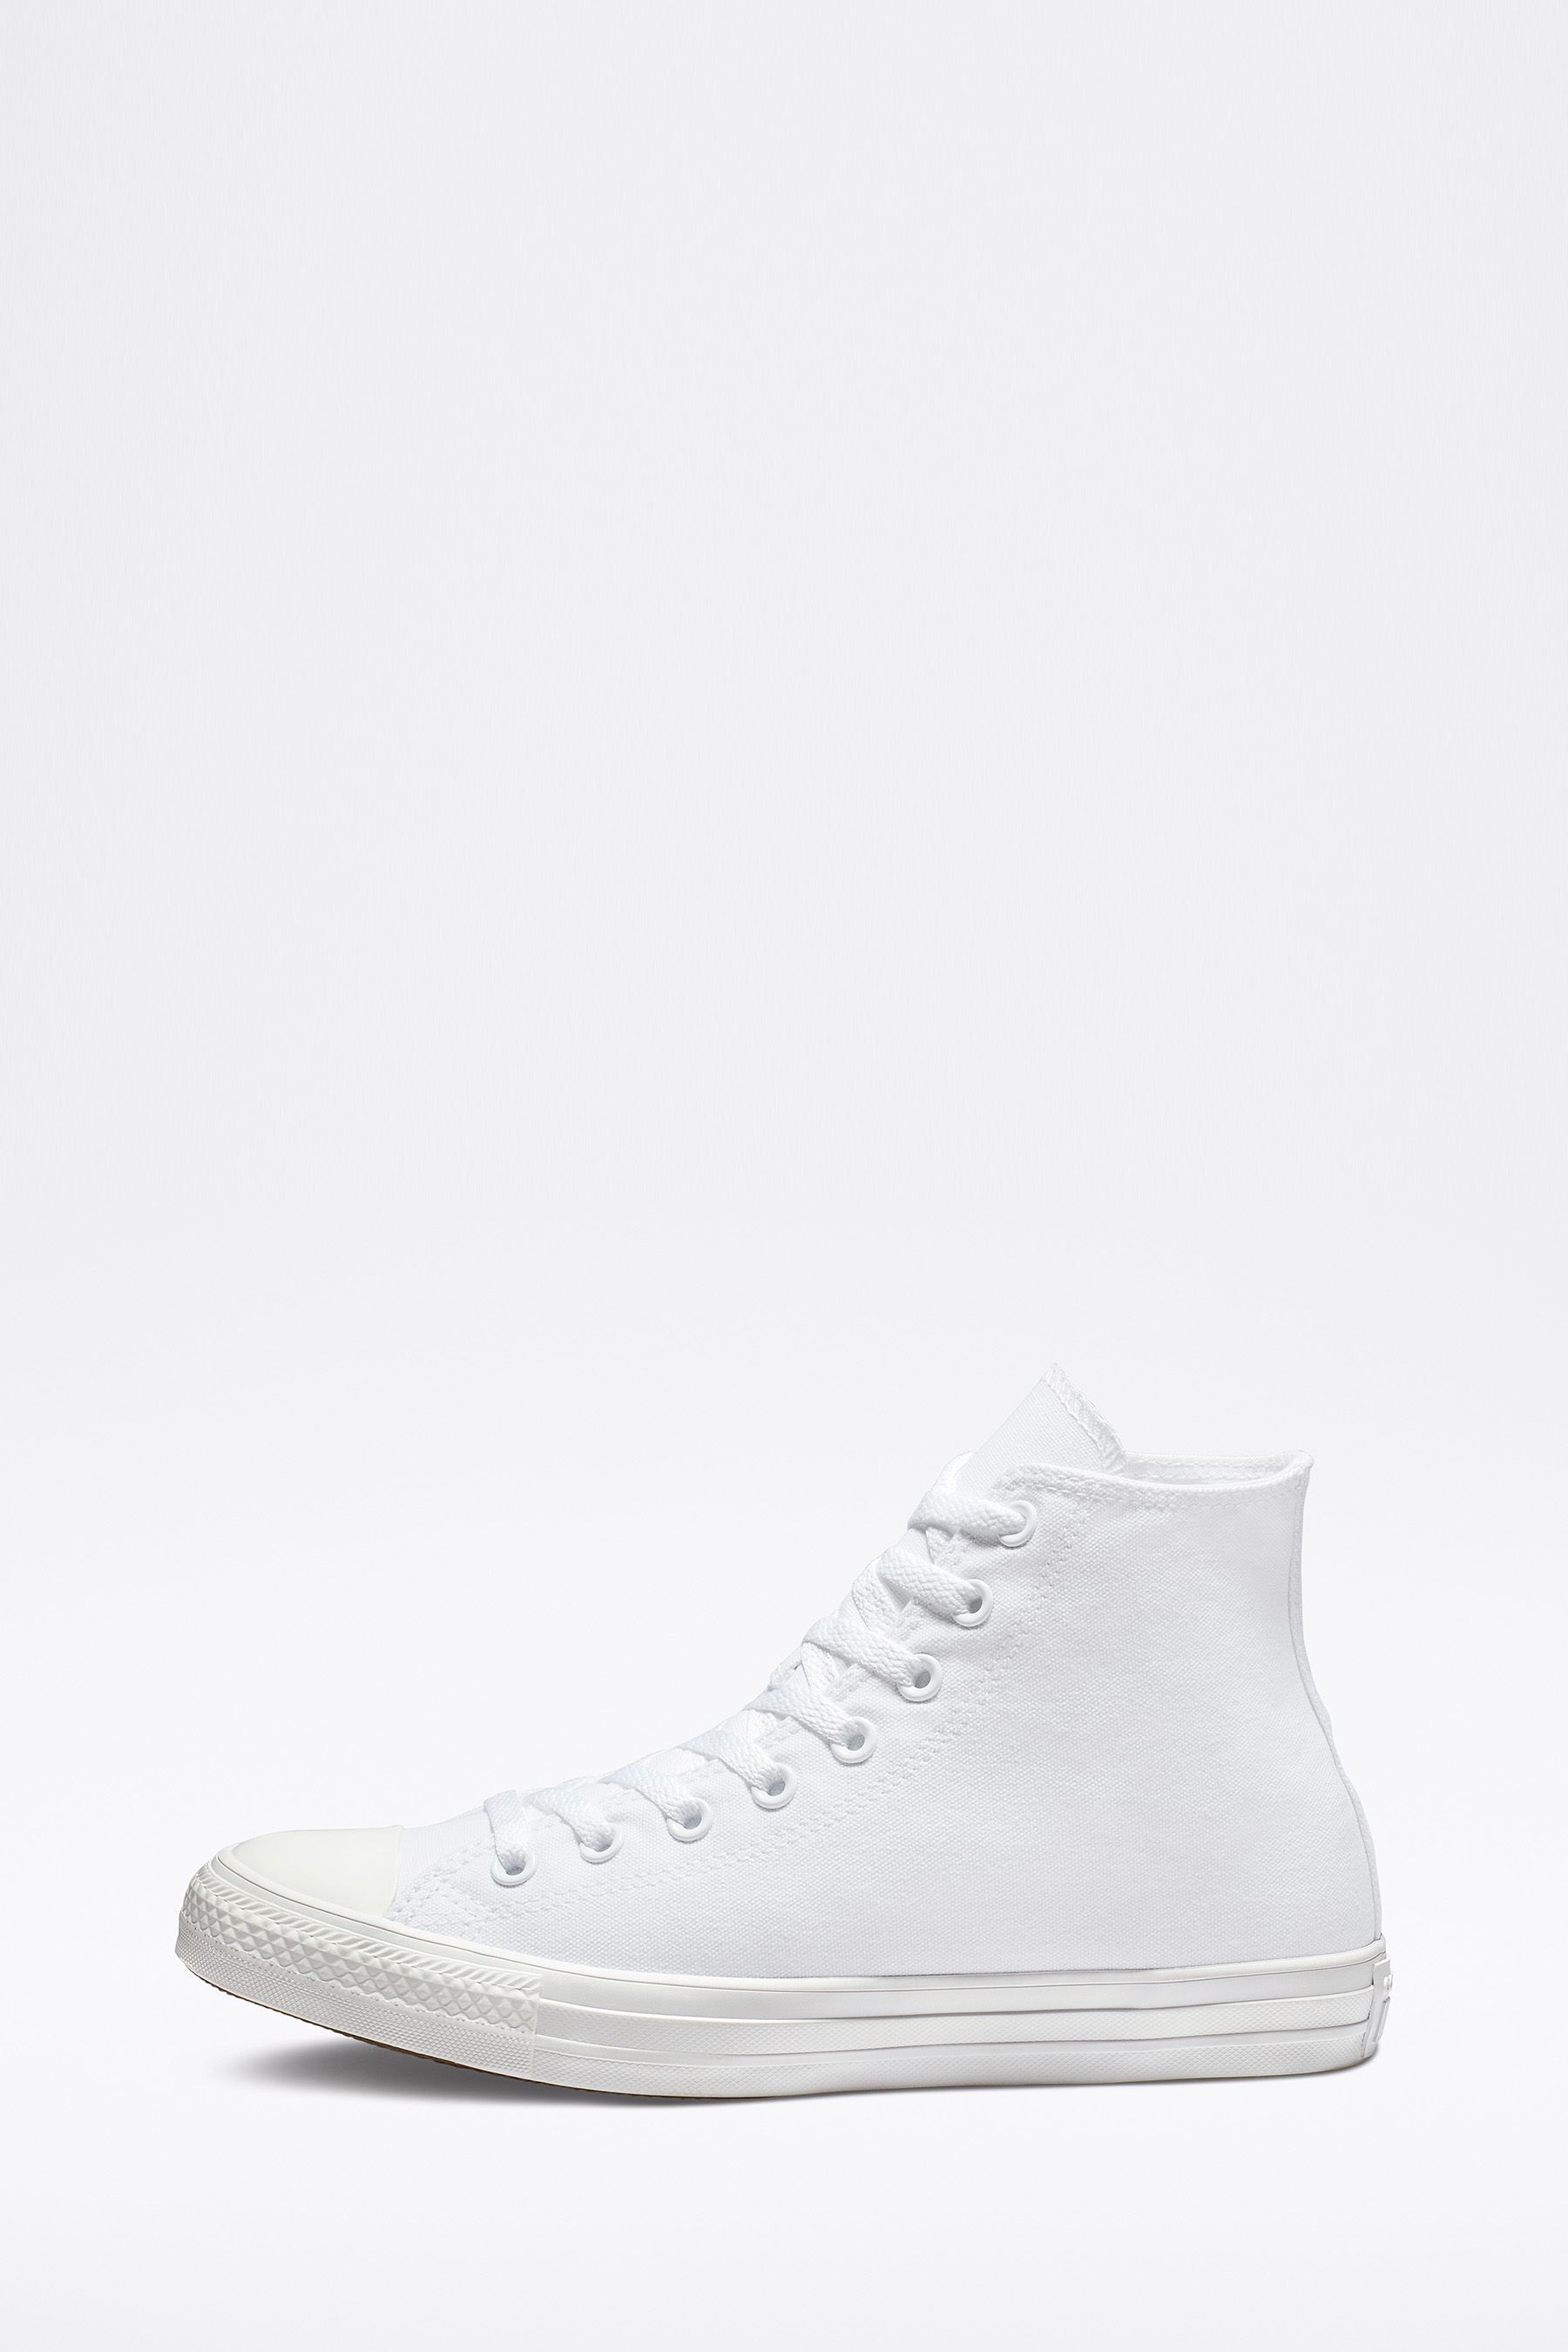 Buy Converse White Chuck High Trainers from the Next UK online shop